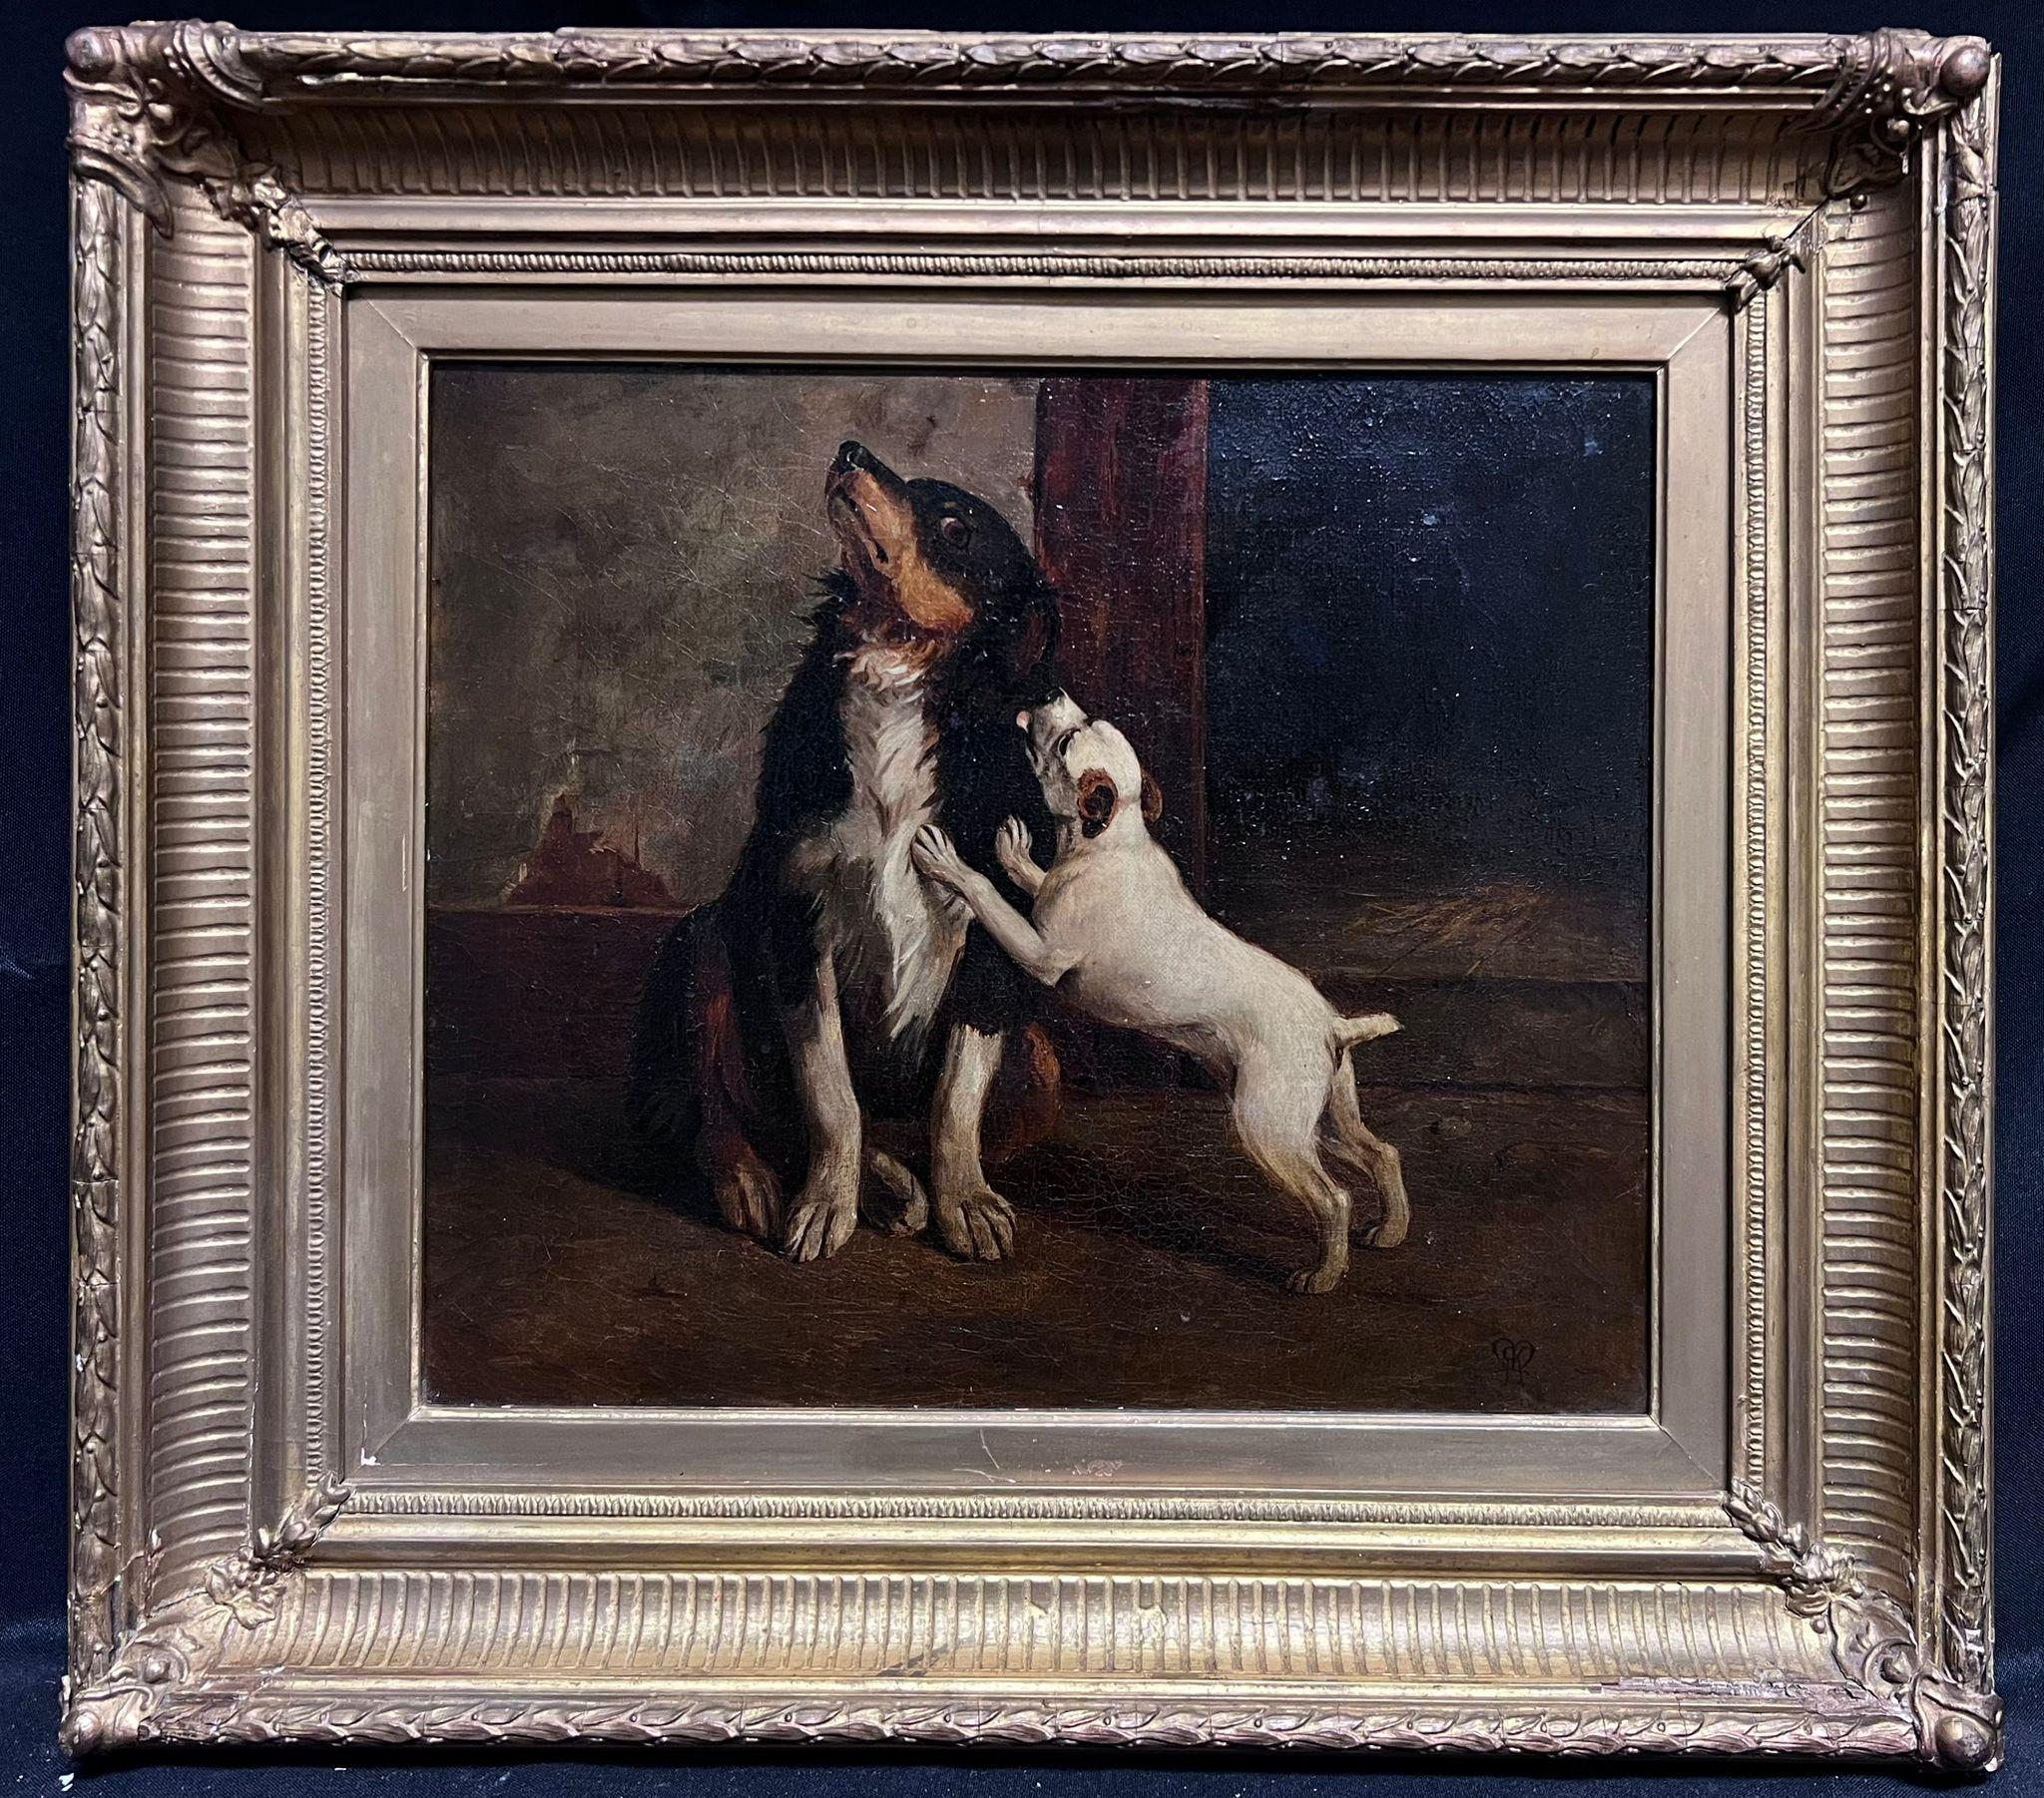 Terrier Puppy & Spaniel Dog in Barn Antique British Signed 19thC Oil Painting